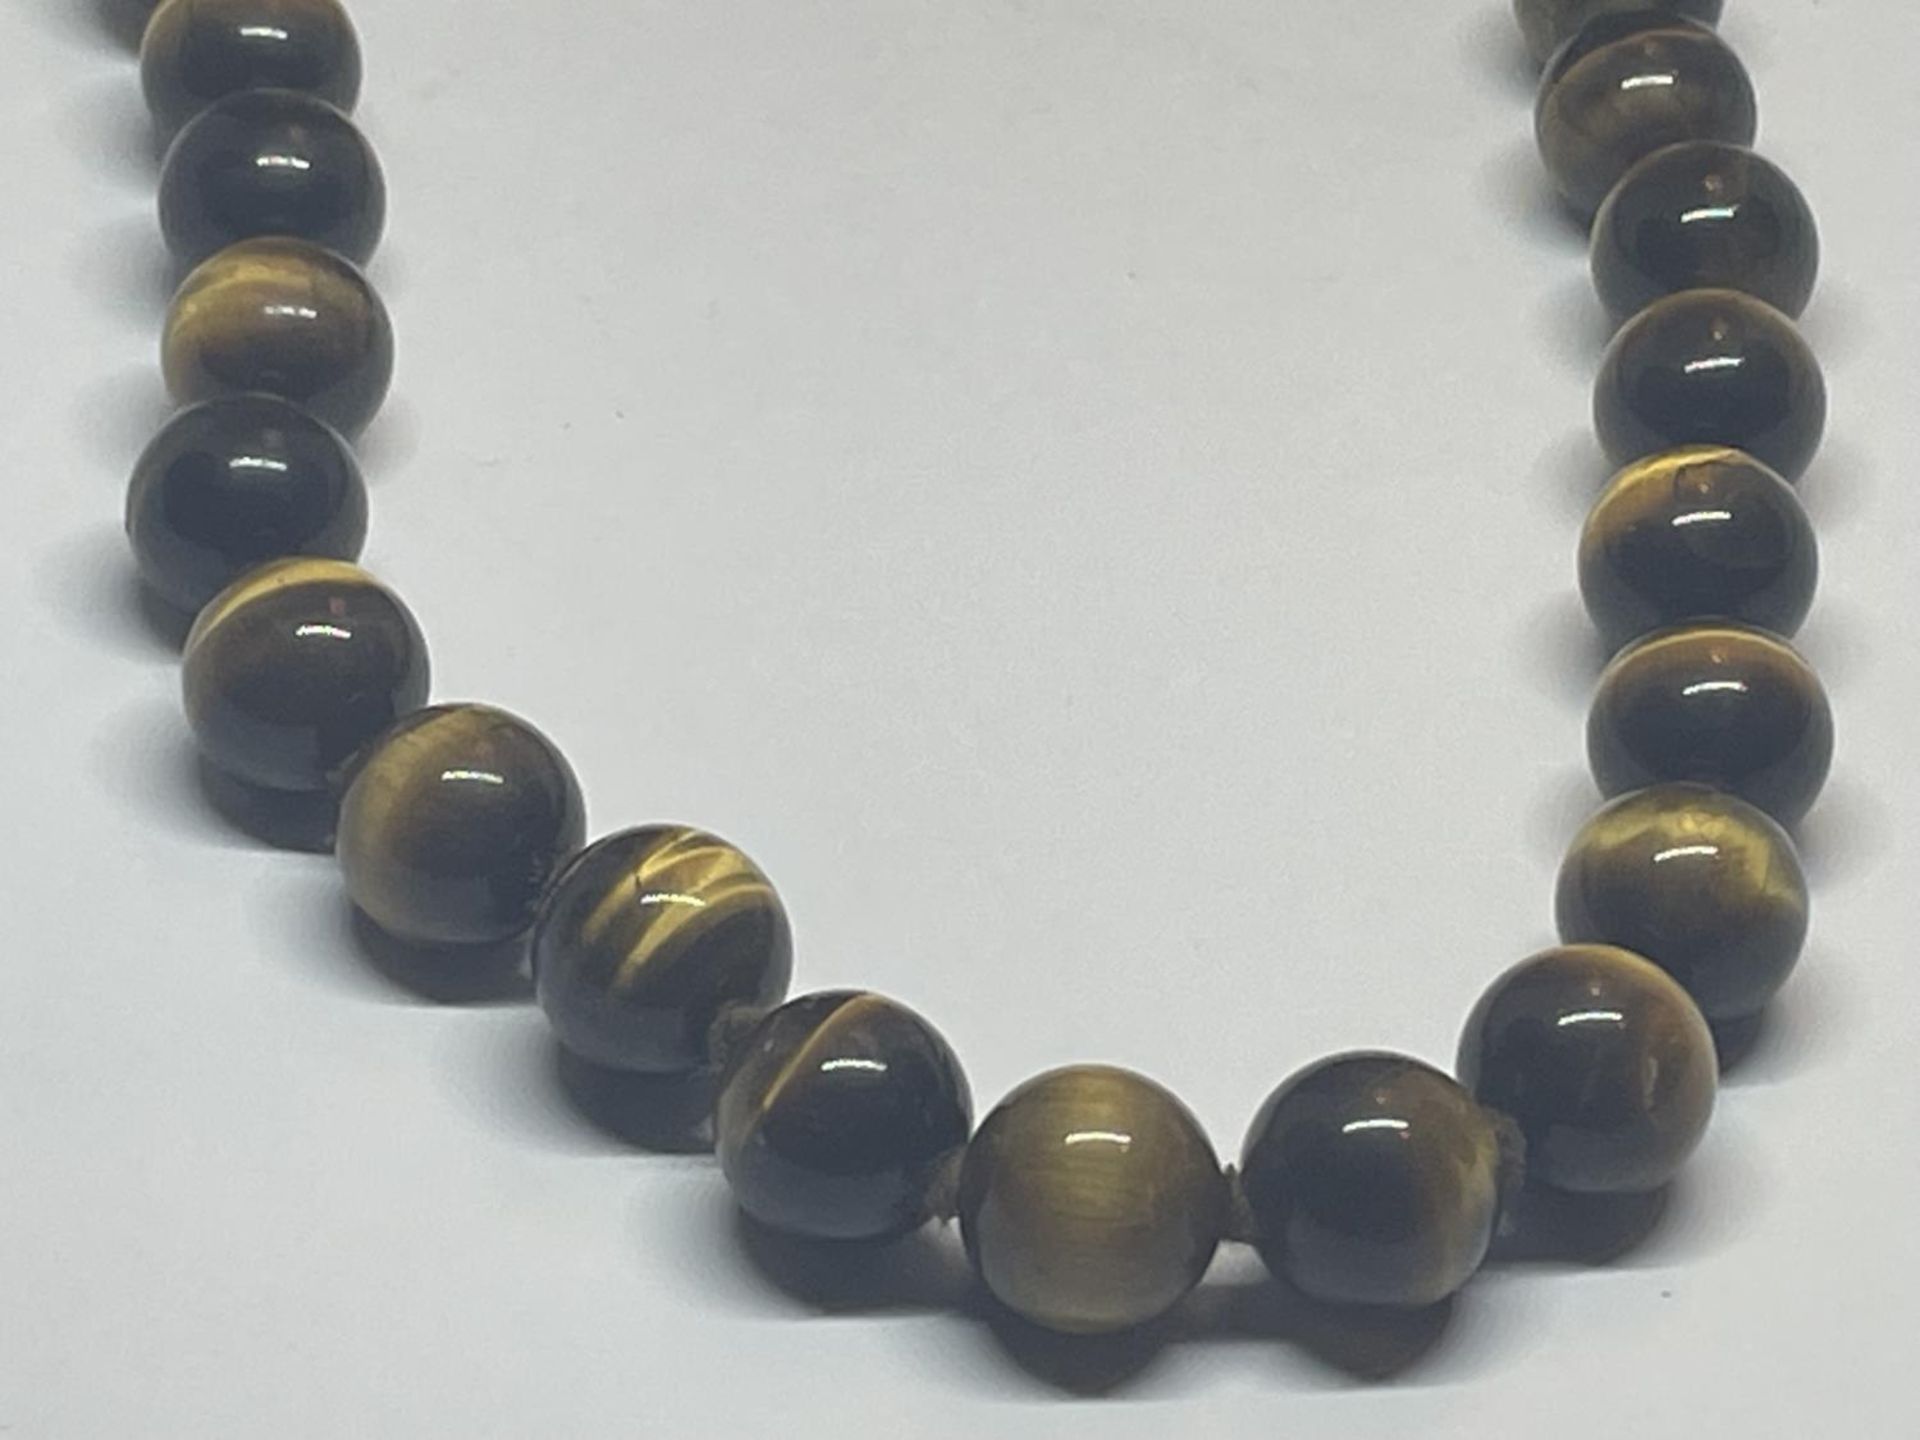 A TIGERS EYE NECKLACE AND A PAIR OF EARRINGS - Image 2 of 4